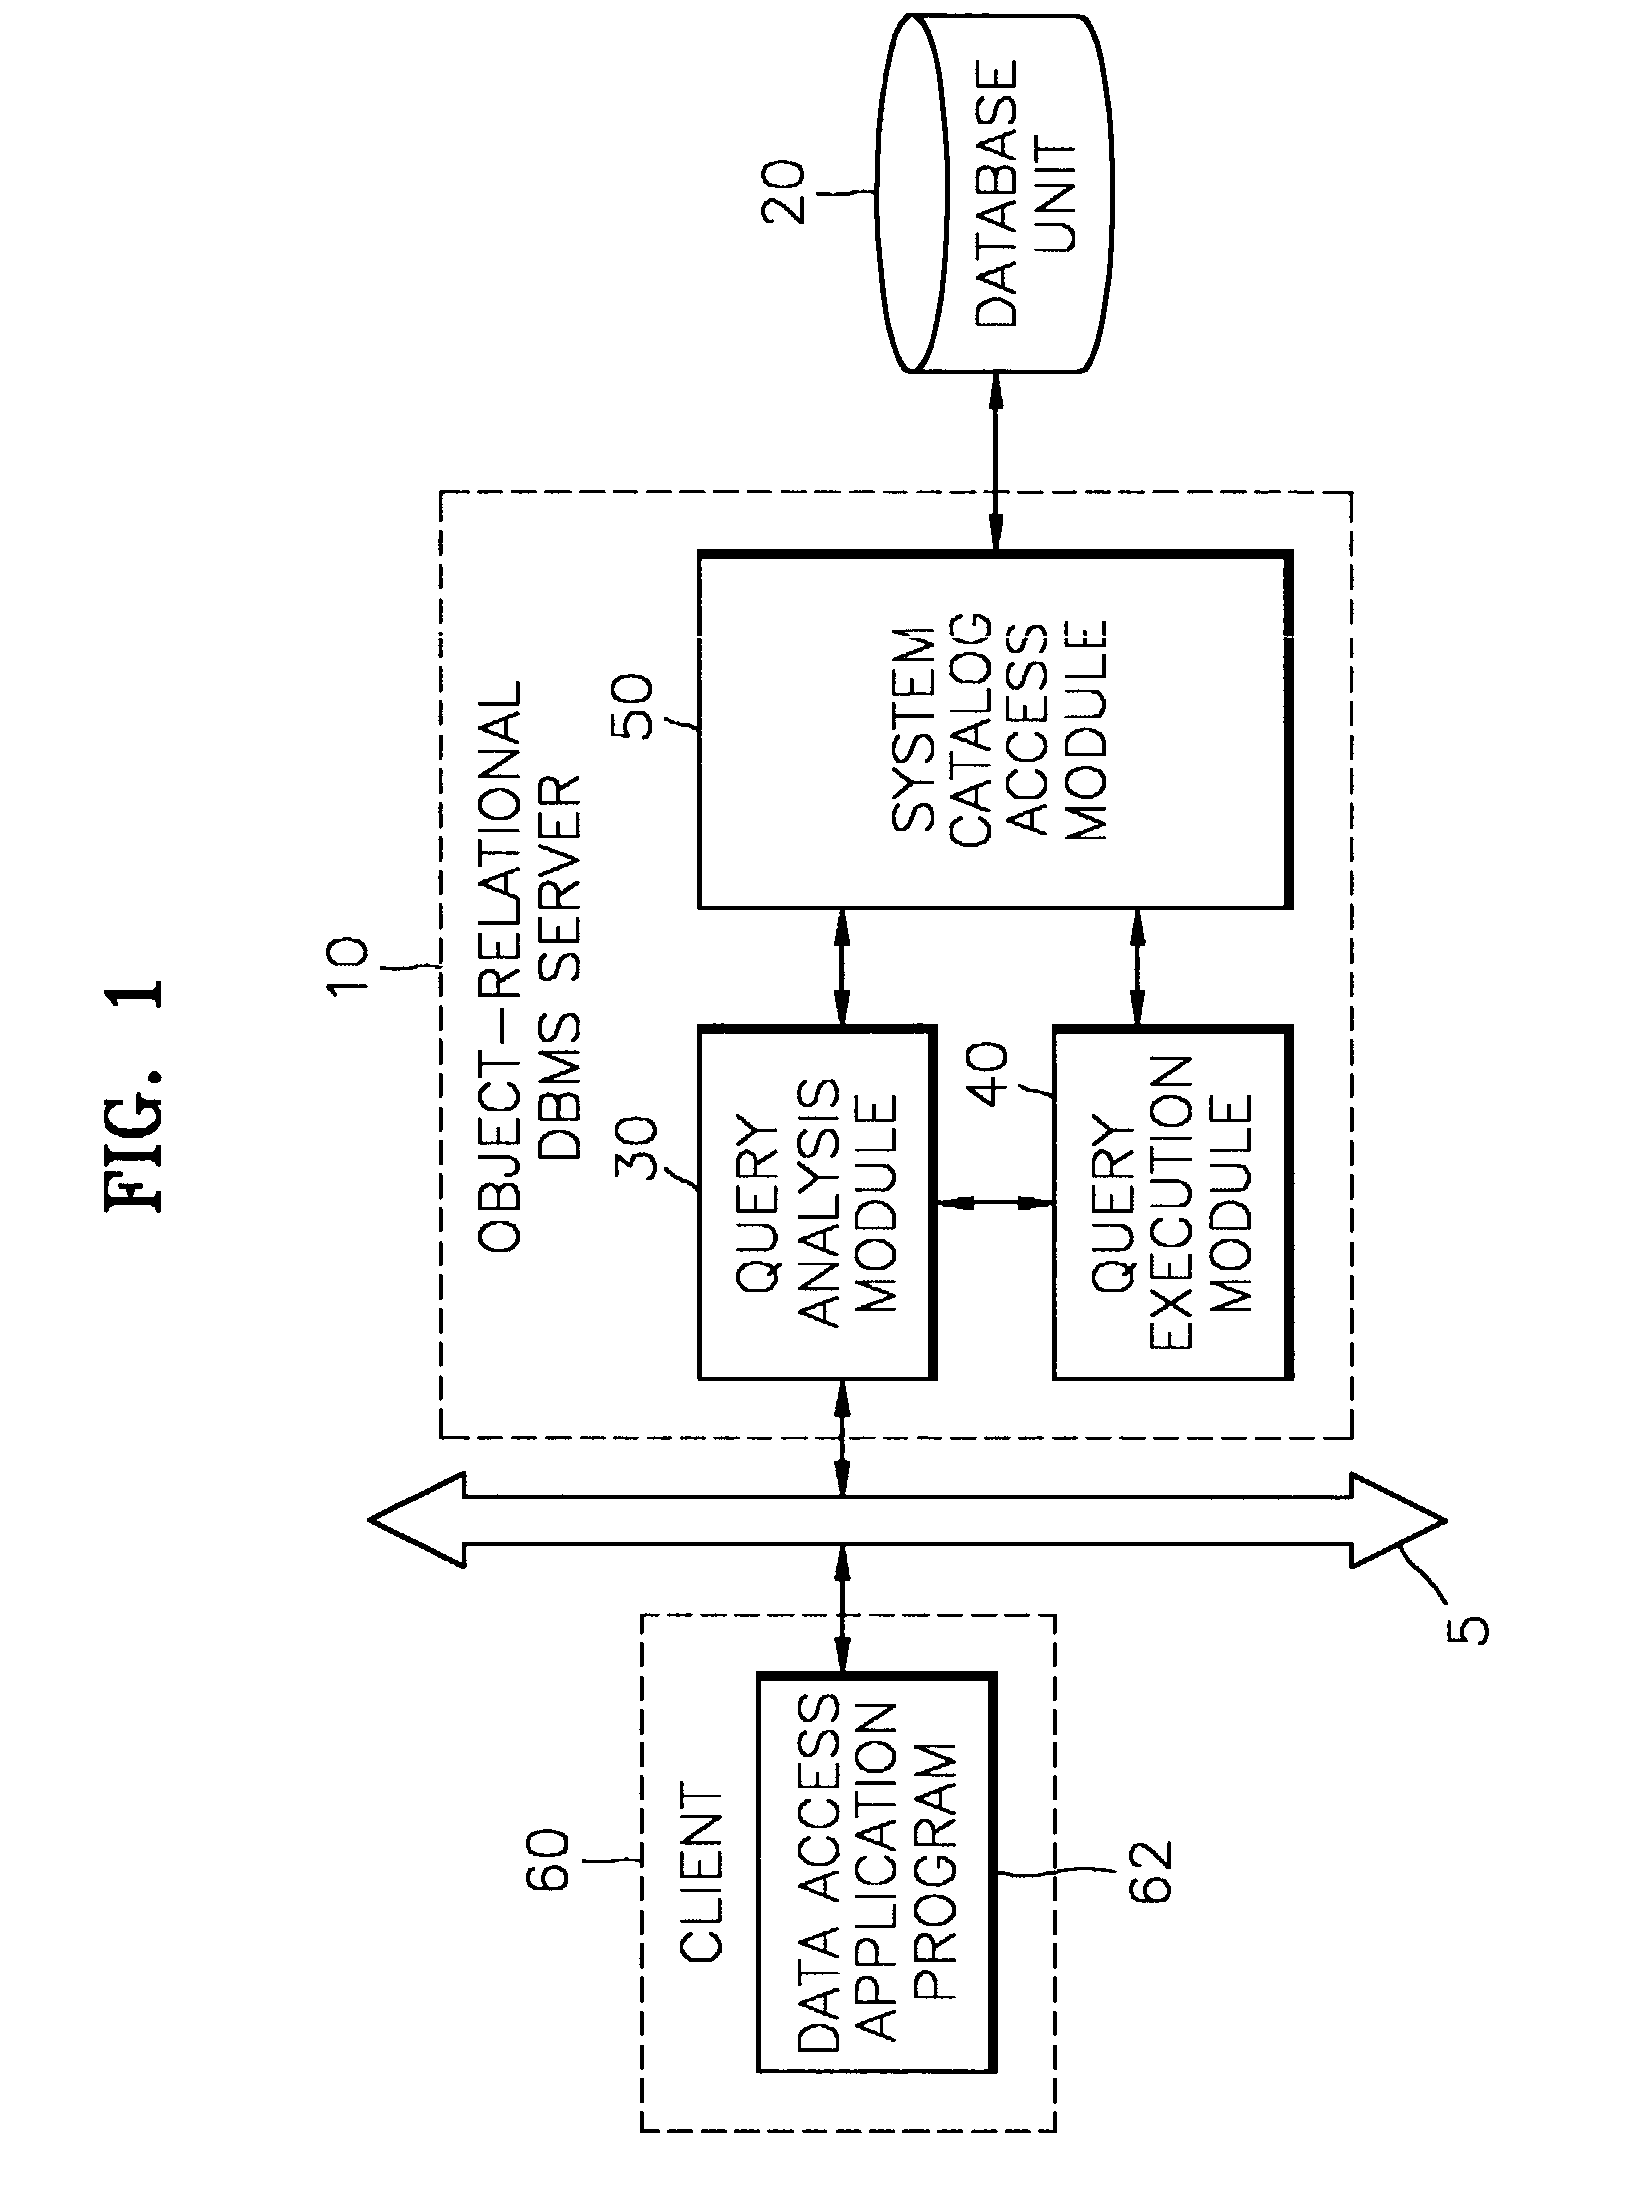 Object-relational database management system and method for deleting class instance for the same